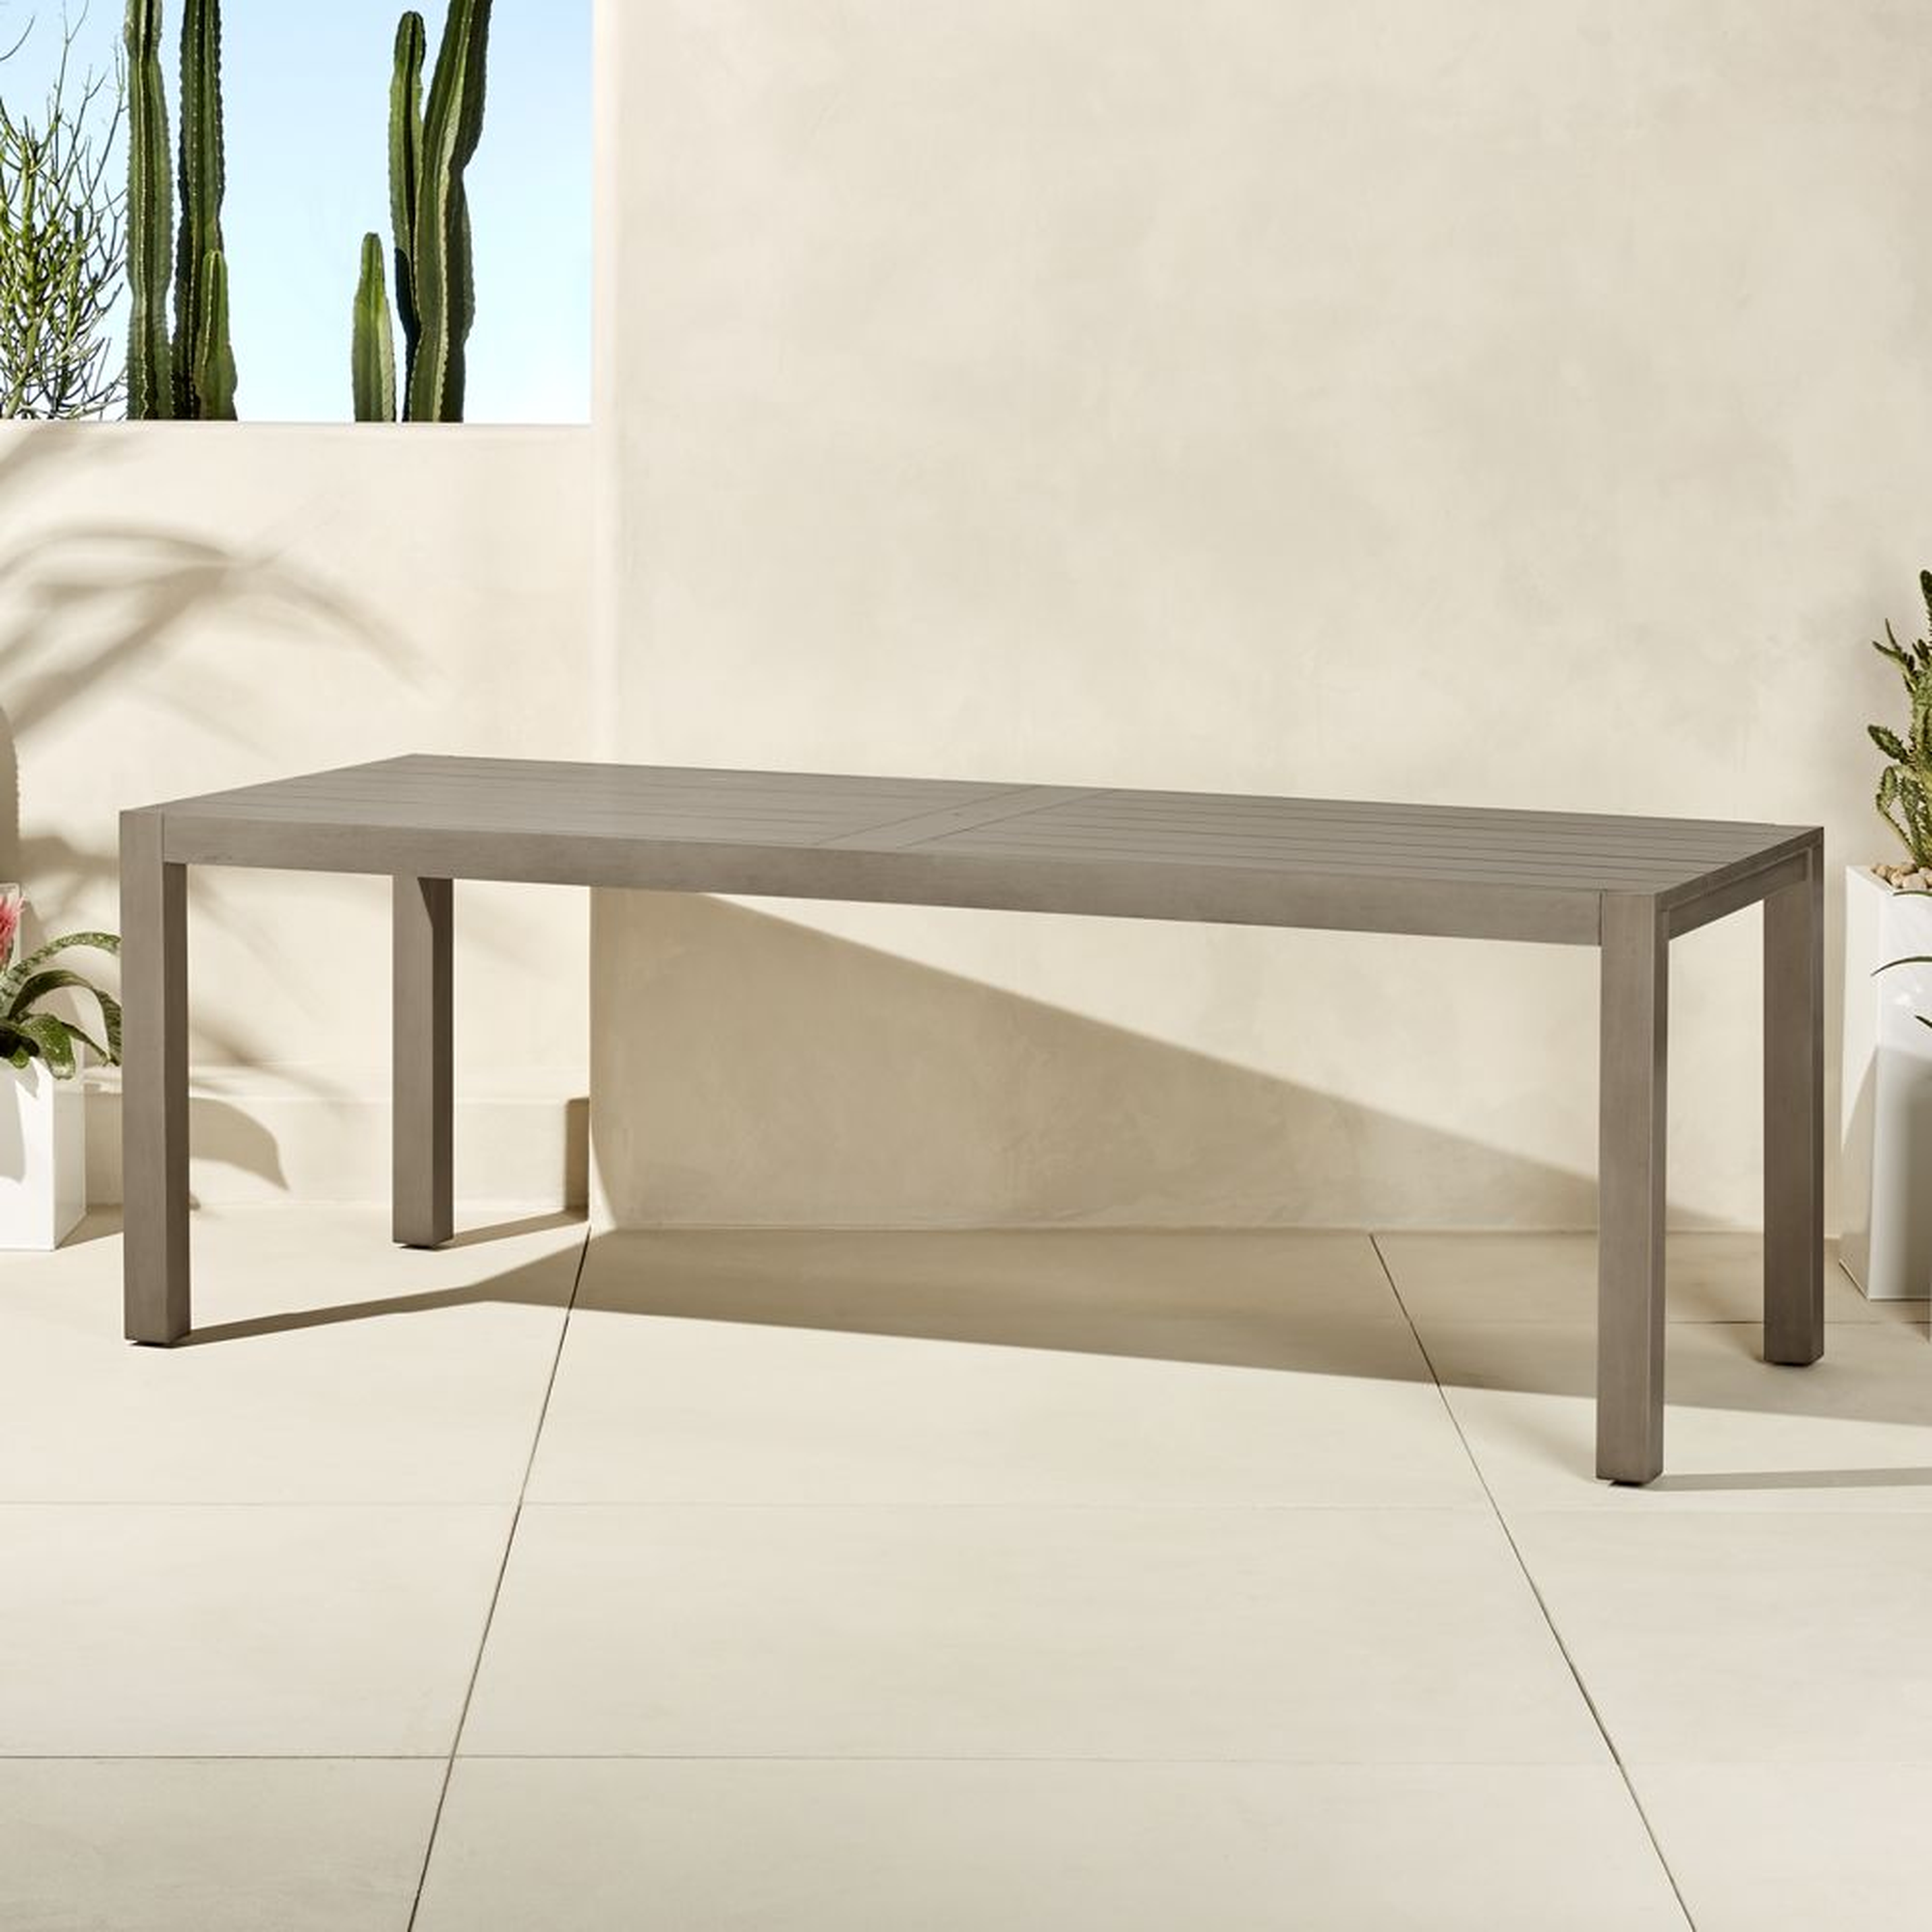 matera large grey outdoor dining table BACK IN STOCK Early July - CB2